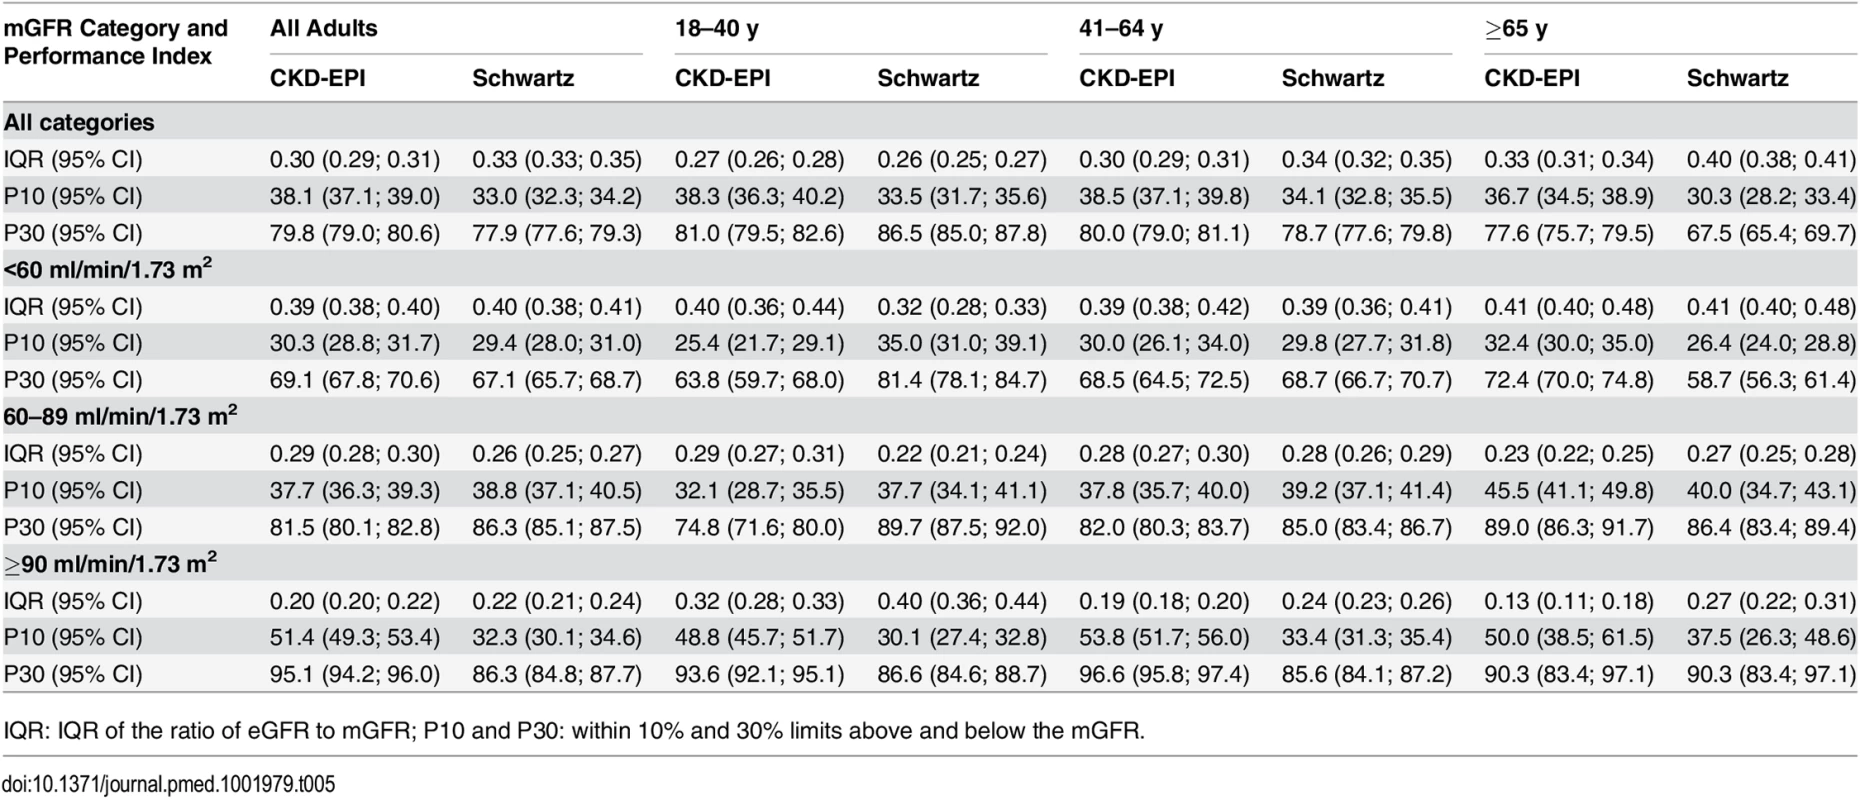 Precision and accuracy of the CKD-EPI and Schwartz equations according to age and mGFR in adults (≥18 y).